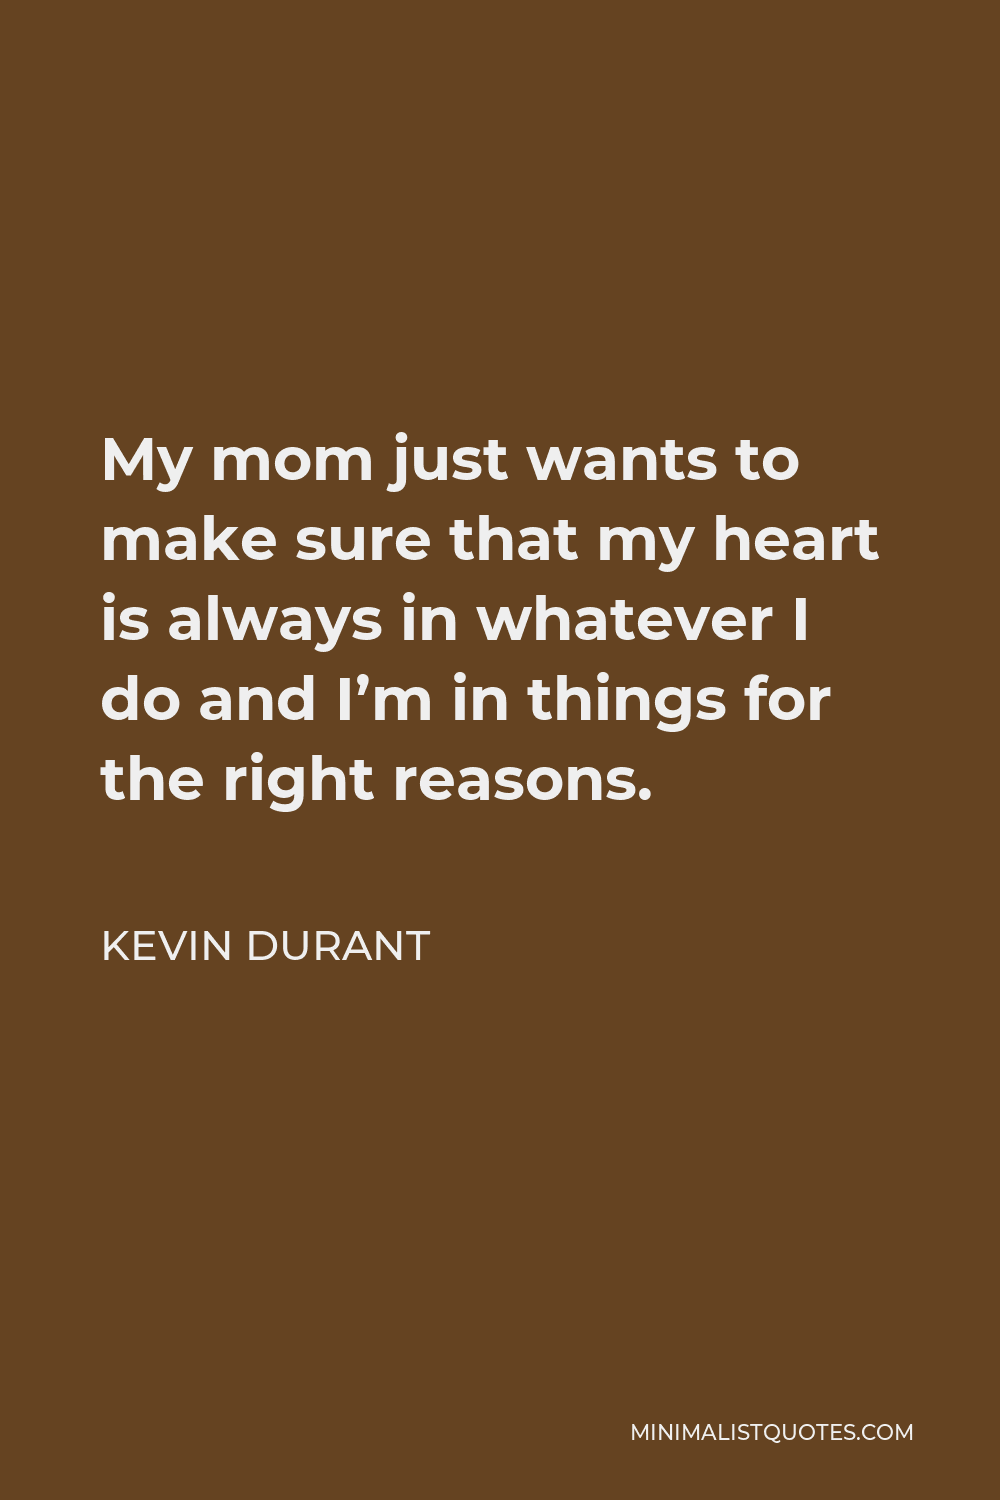 Kevin Durant Quote - My mom just wants to make sure that my heart is always in whatever I do and I’m in things for the right reasons.